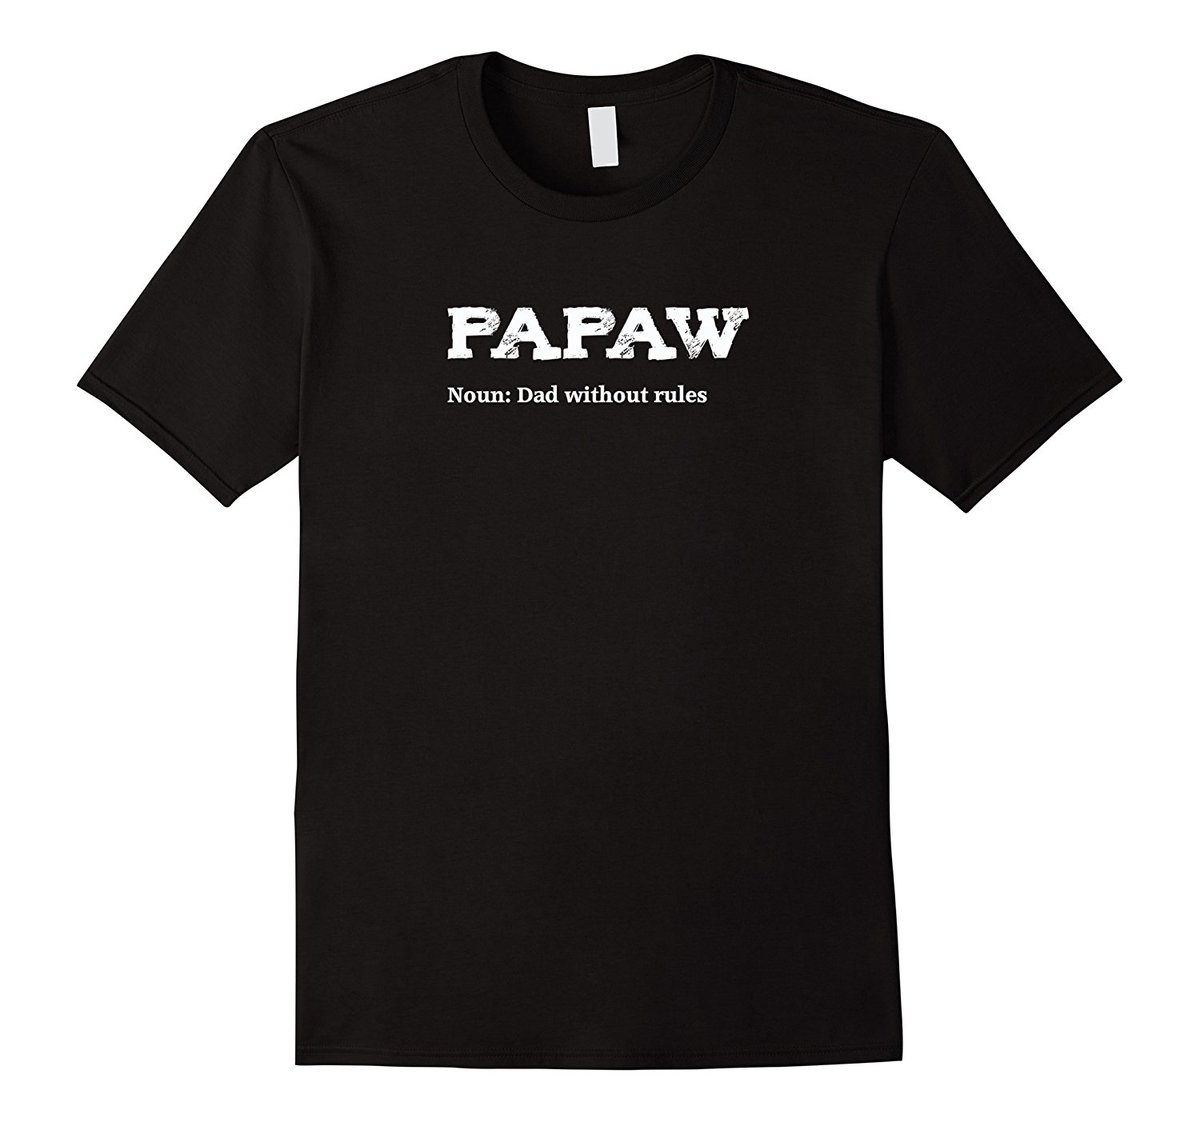 #Papaw gift t-shirt - Dad without rules - #Grandparentsday amzn.to/2FwnsiM
#